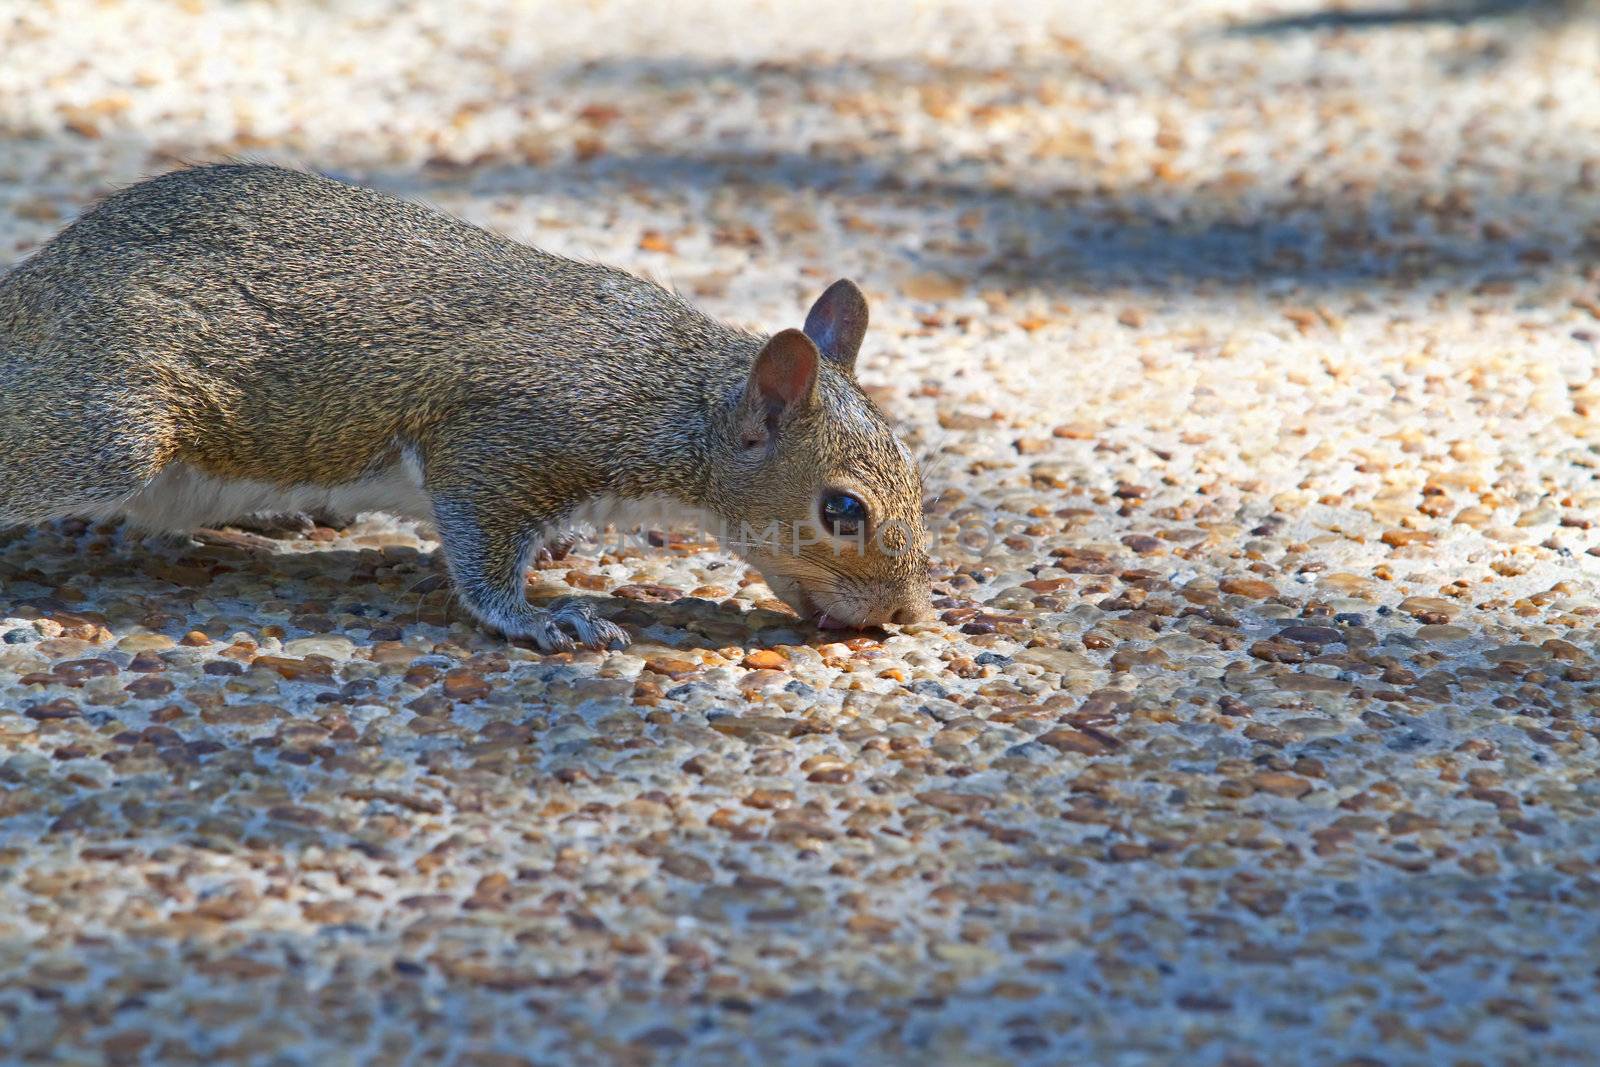 A squirrel licking the ground for something to eat